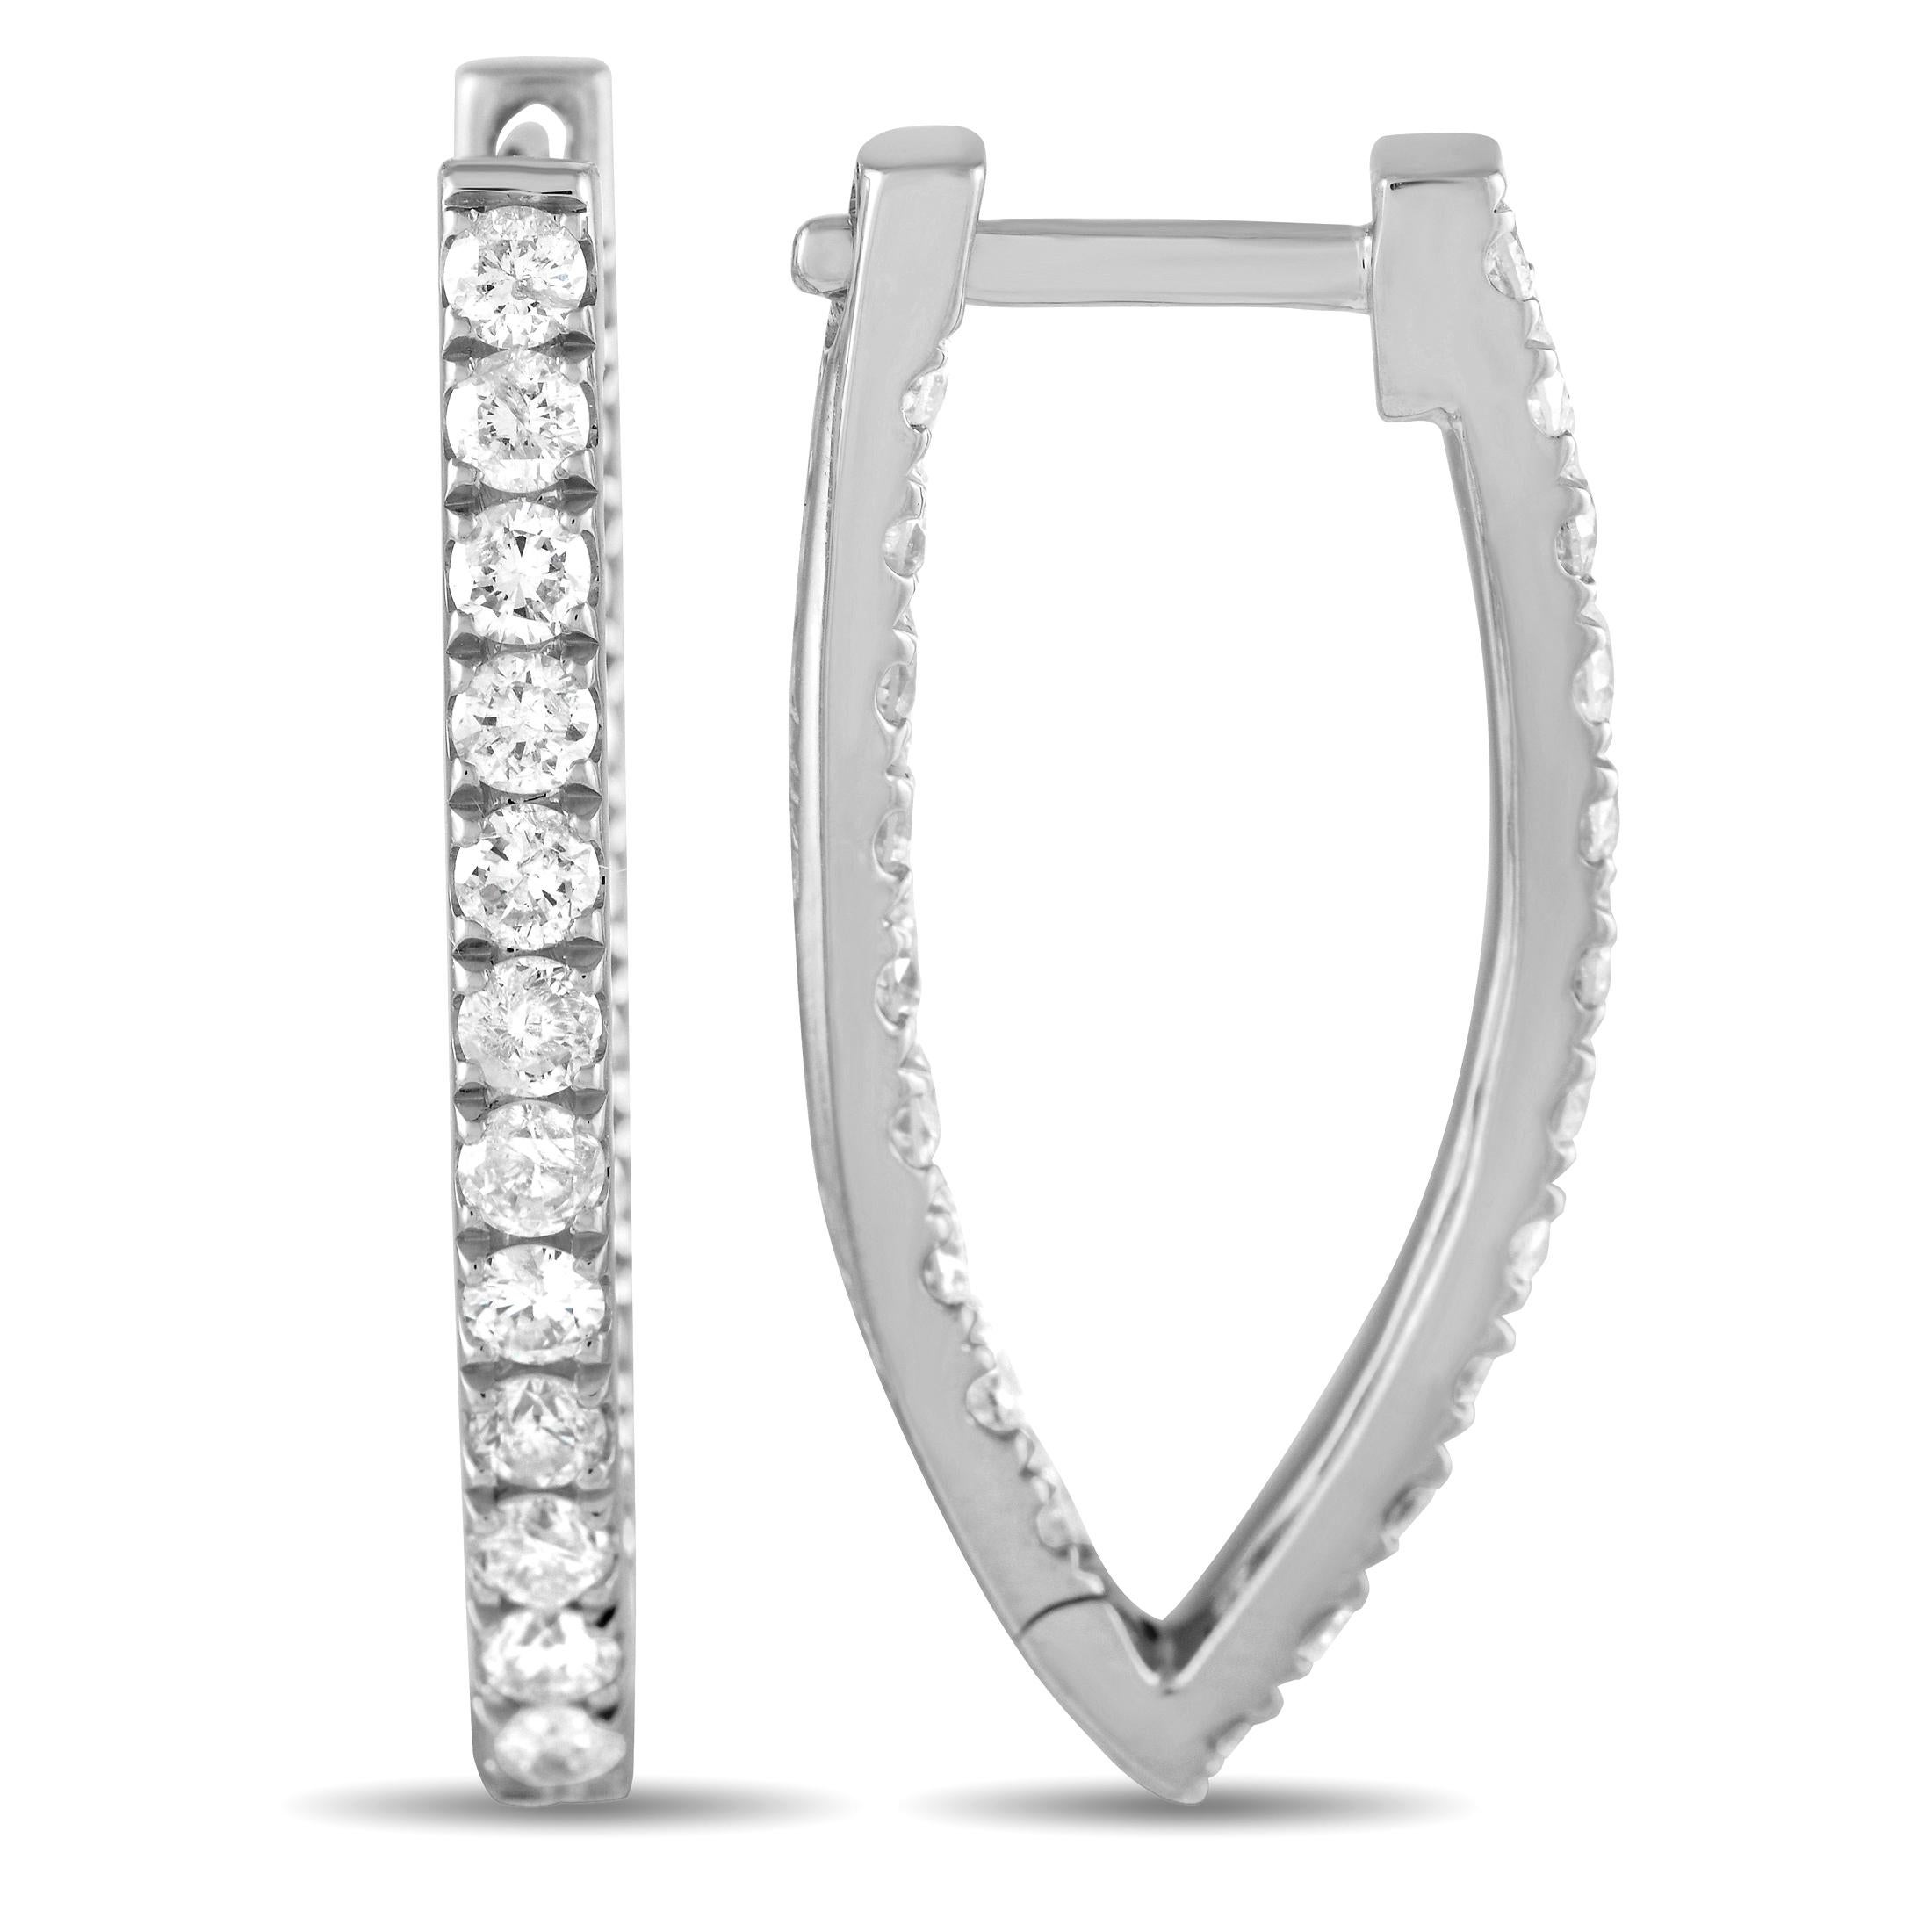 No jewelry box will be complete without diamond hoops. Make sure you add this dazzling pair to your collection. Each 14K white gold earring measures 1 by 0.50 and weighs 1.9 grams. Sparkling diamonds run along each hoop's front-facing outer and